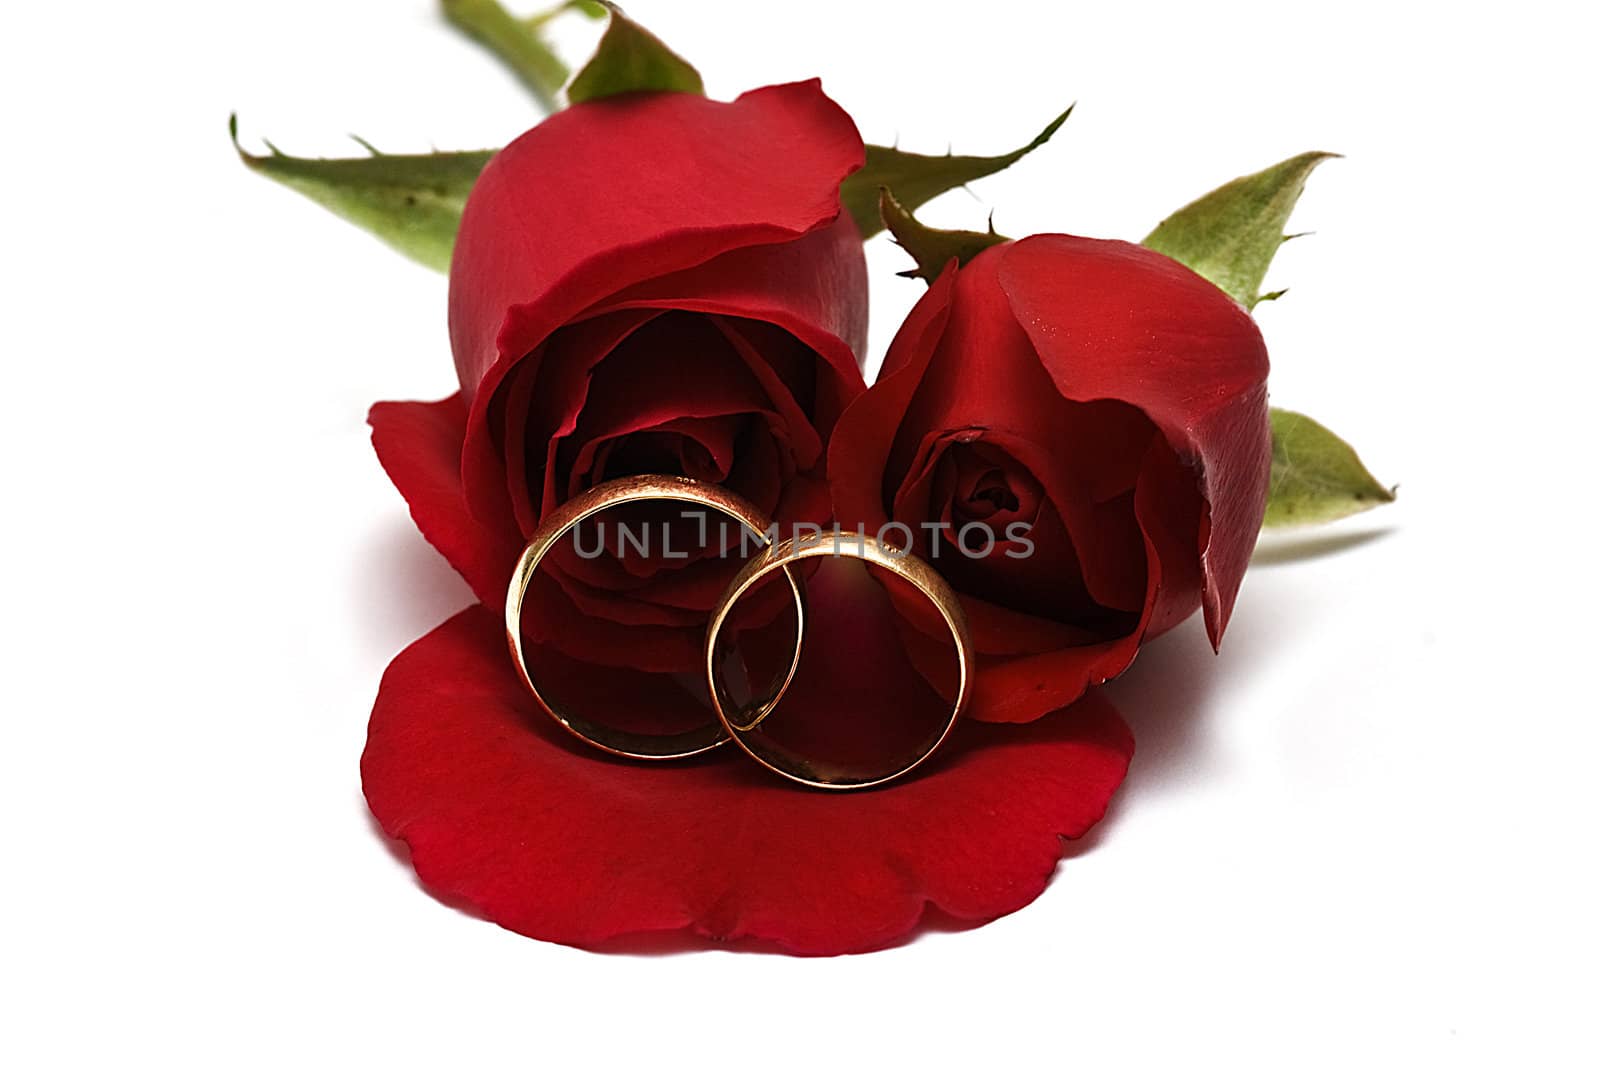 Wedding rings and fresh roses. by angelsimon